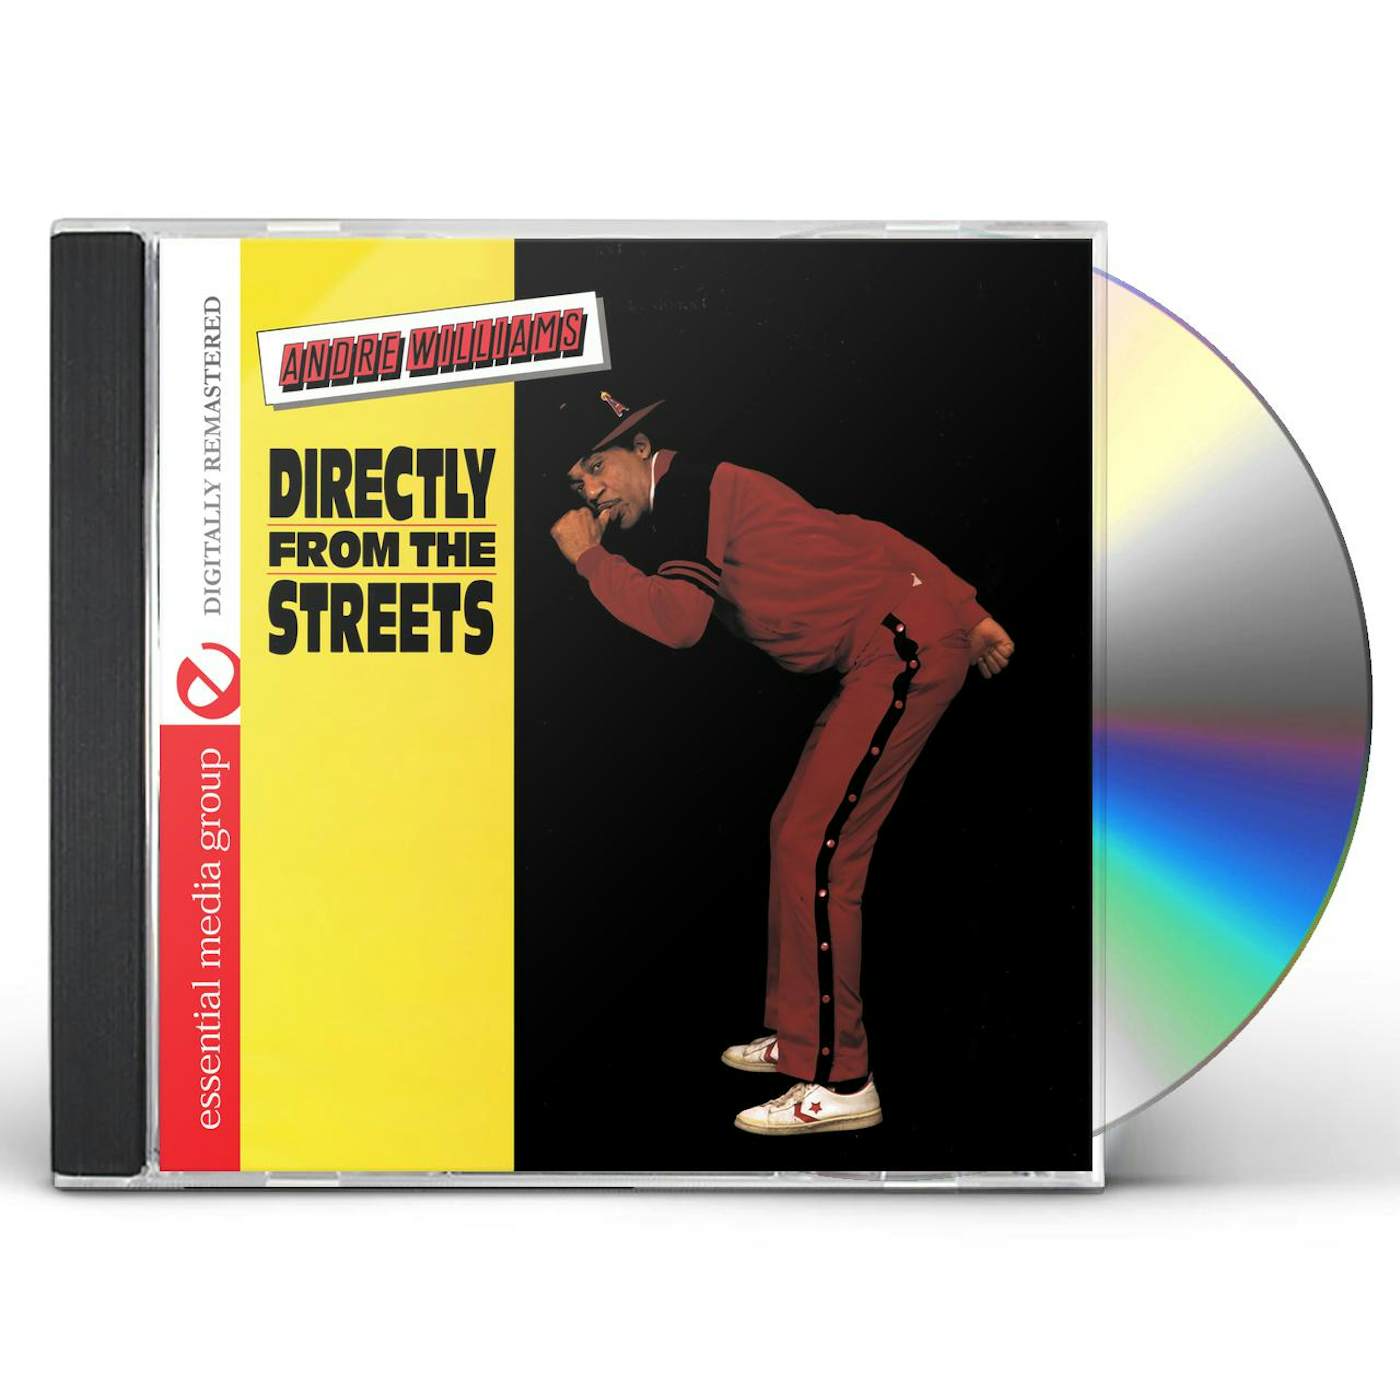 Andre Williams DIRECTLY FROM STREETS CD